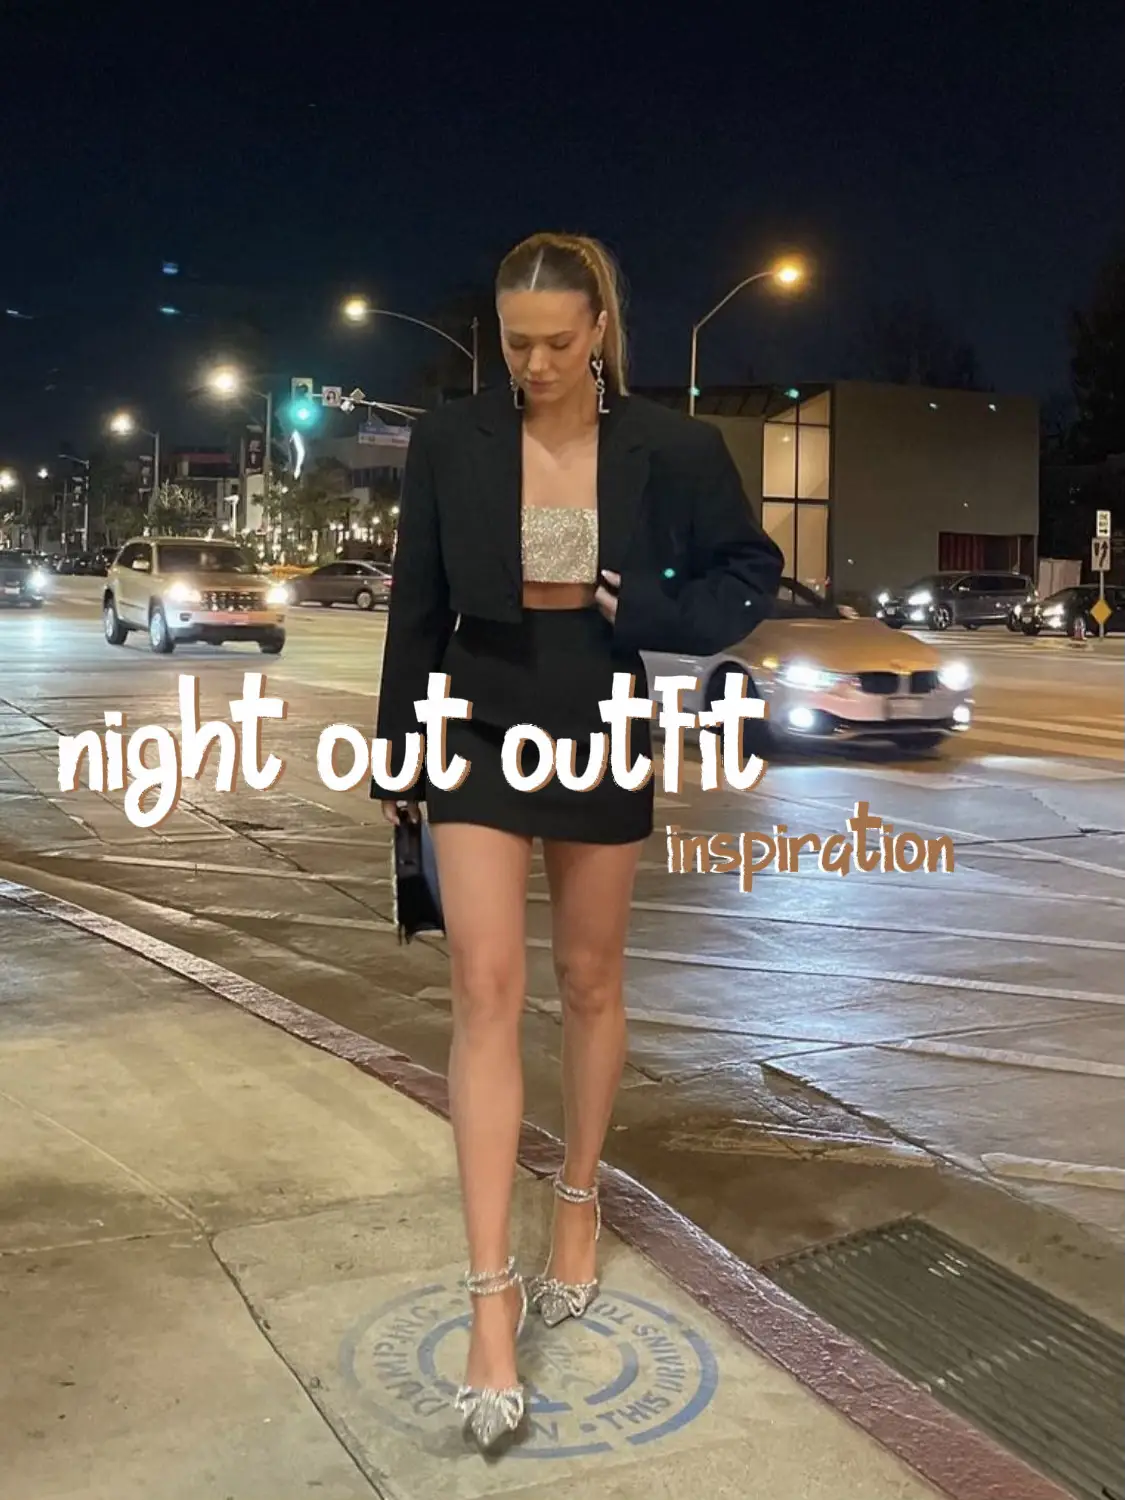 OUTFIT INSPO - GIRLS NIGHT  Gallery posted by loulouduvillier